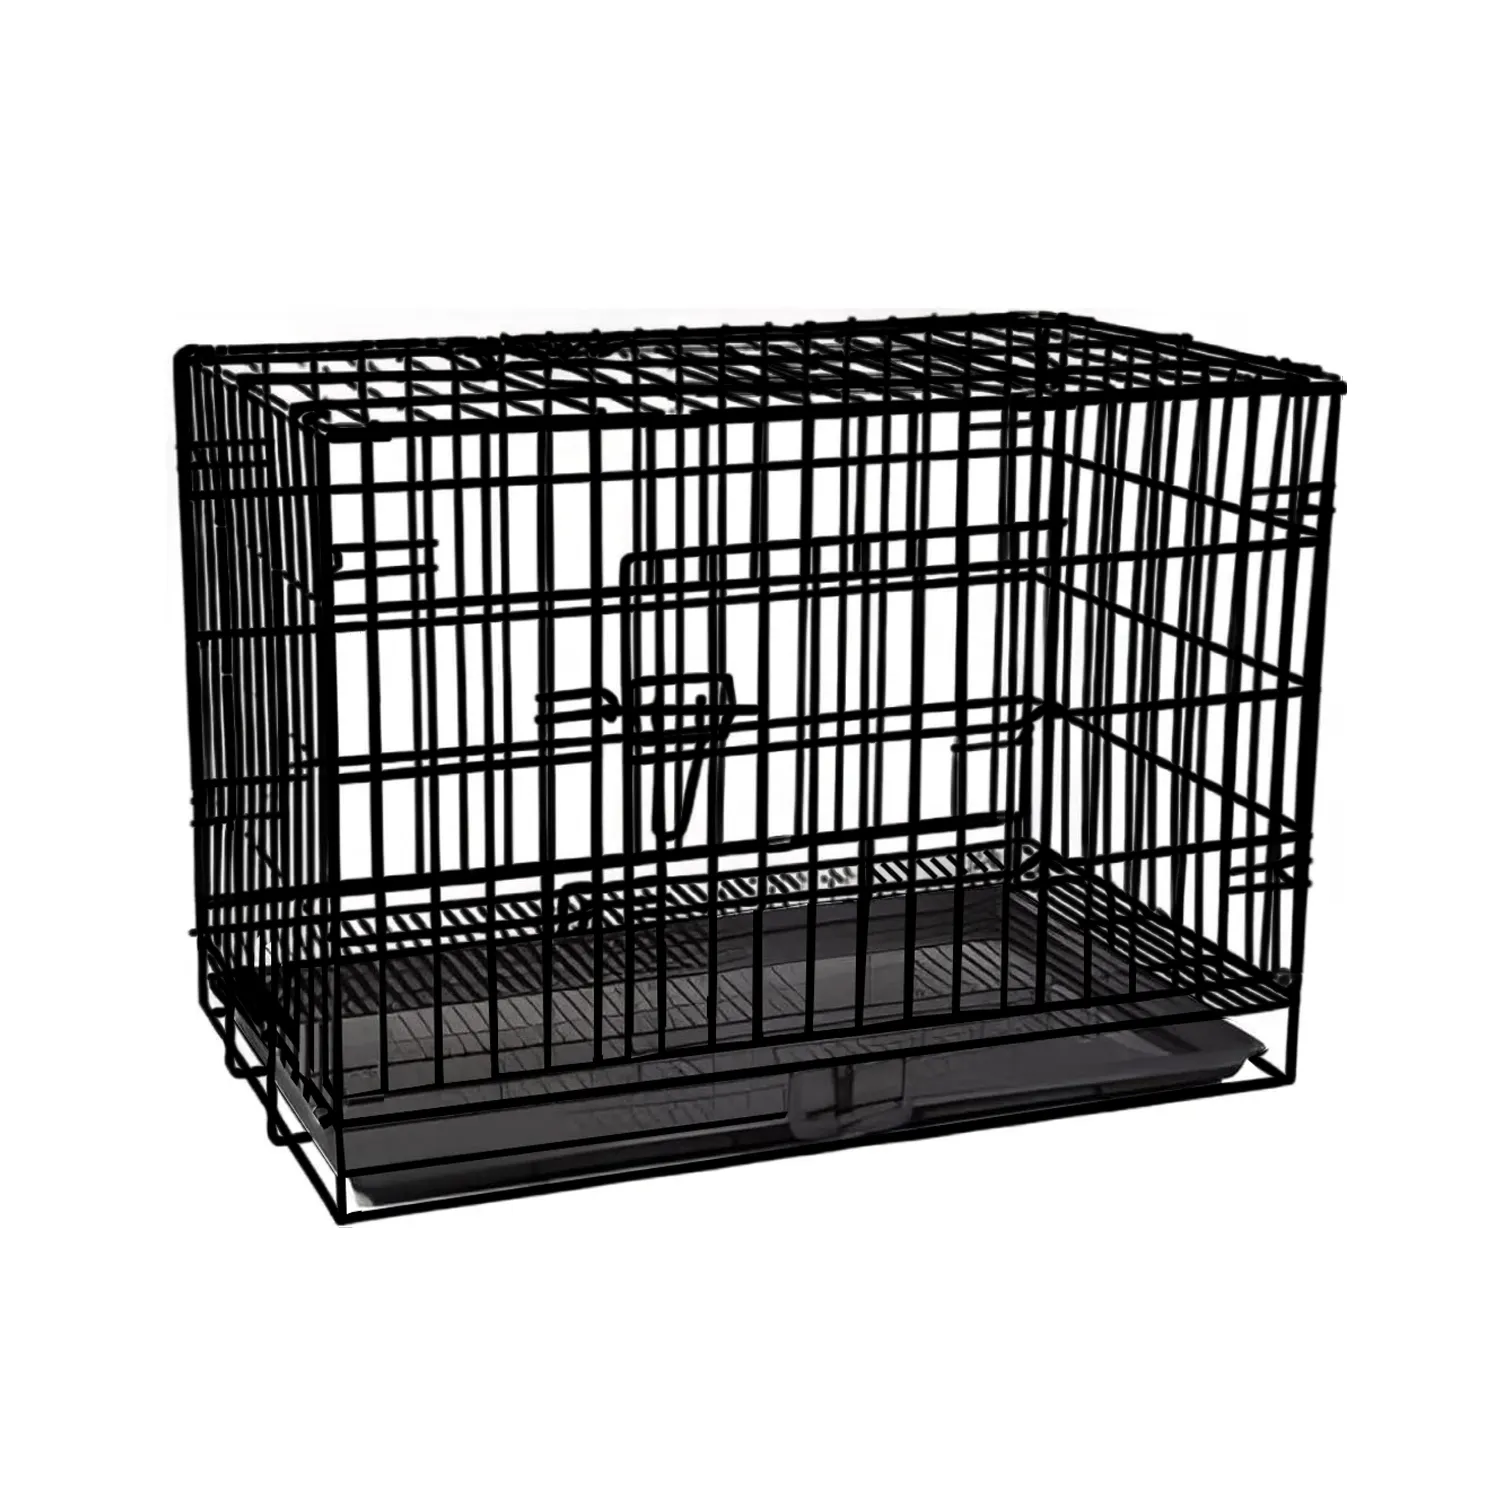 Multifunctional Custom Size Collapsible Wholesale New Design High Quality Dog Cage Foldable Crate Dog Kennel Pet House